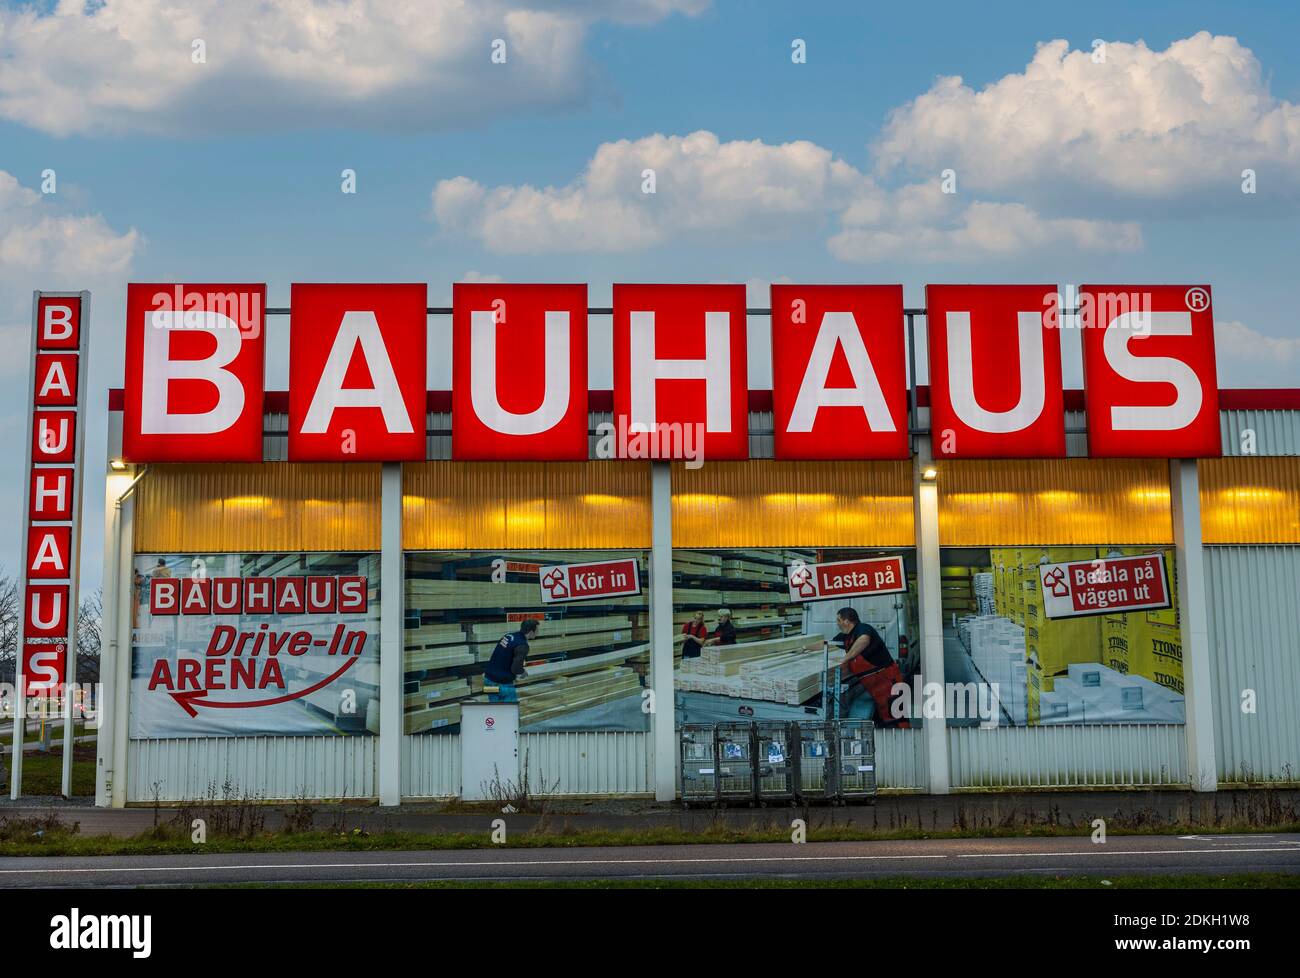 The Bauhaus Interior View High Resolution Stock Photography And Images Alamy